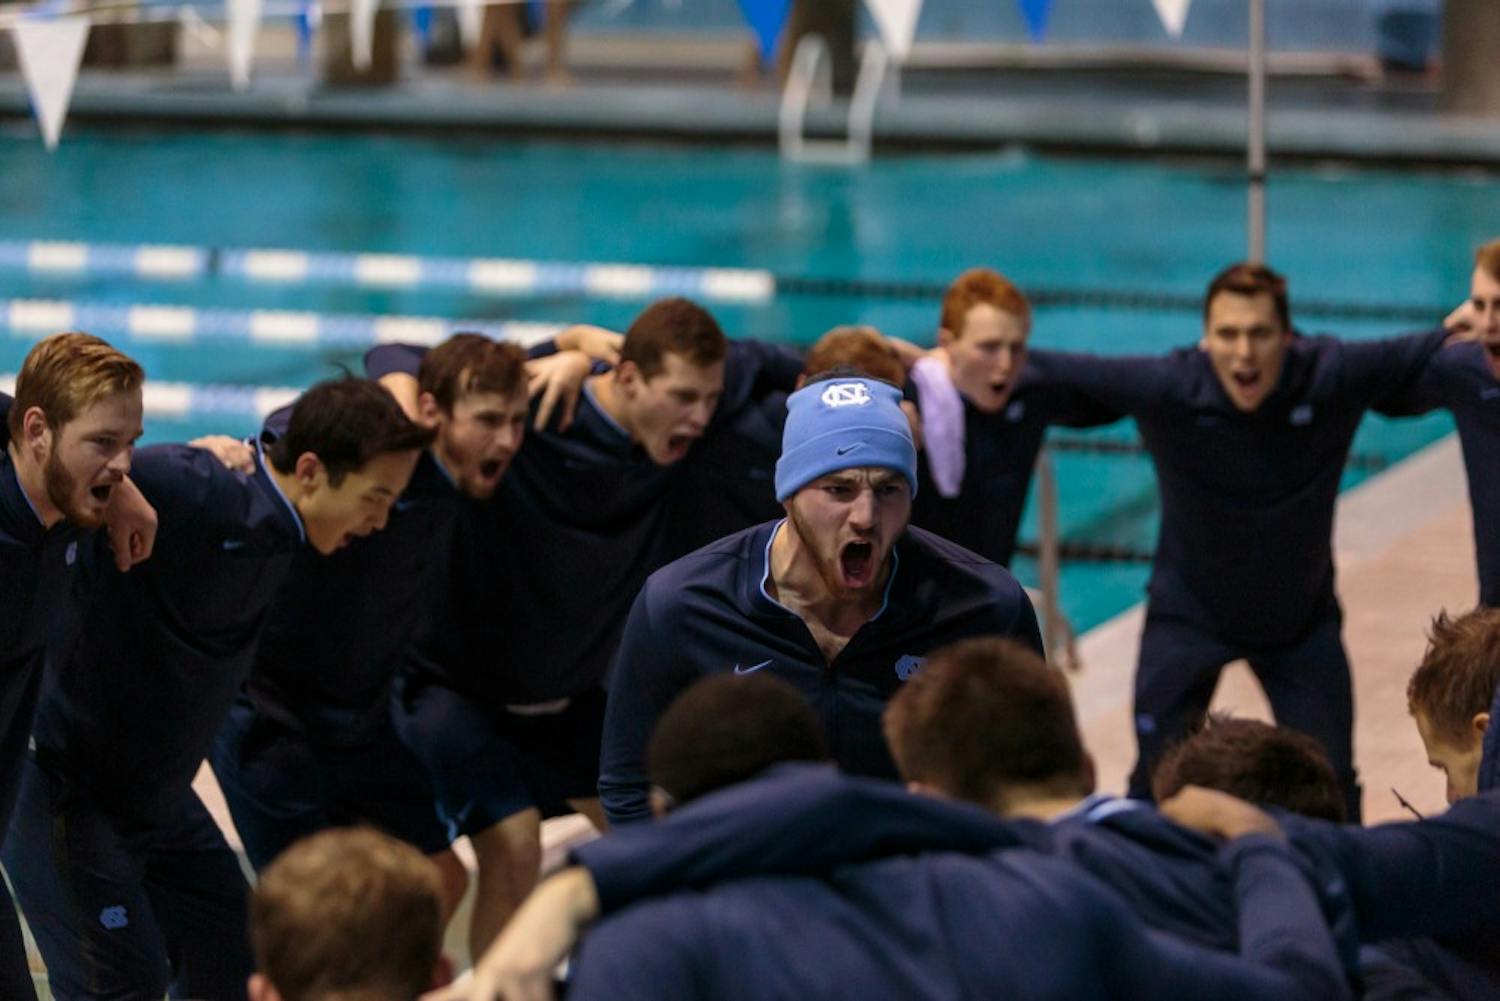 UNC makes a splash, remains undefeated against USC on Friday, Oct. 26